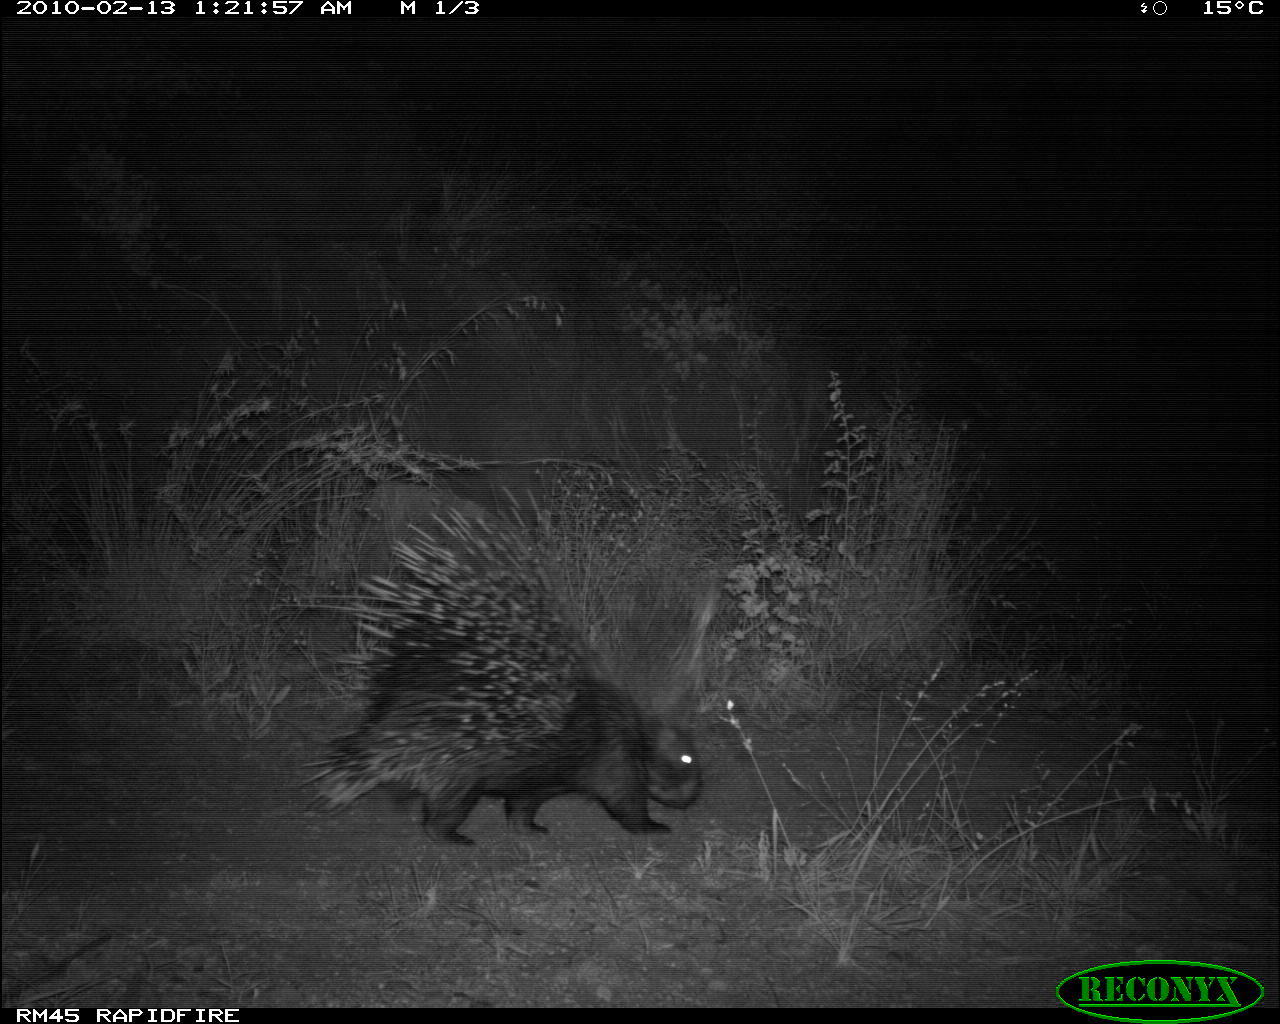 Image of North African crested porcupine